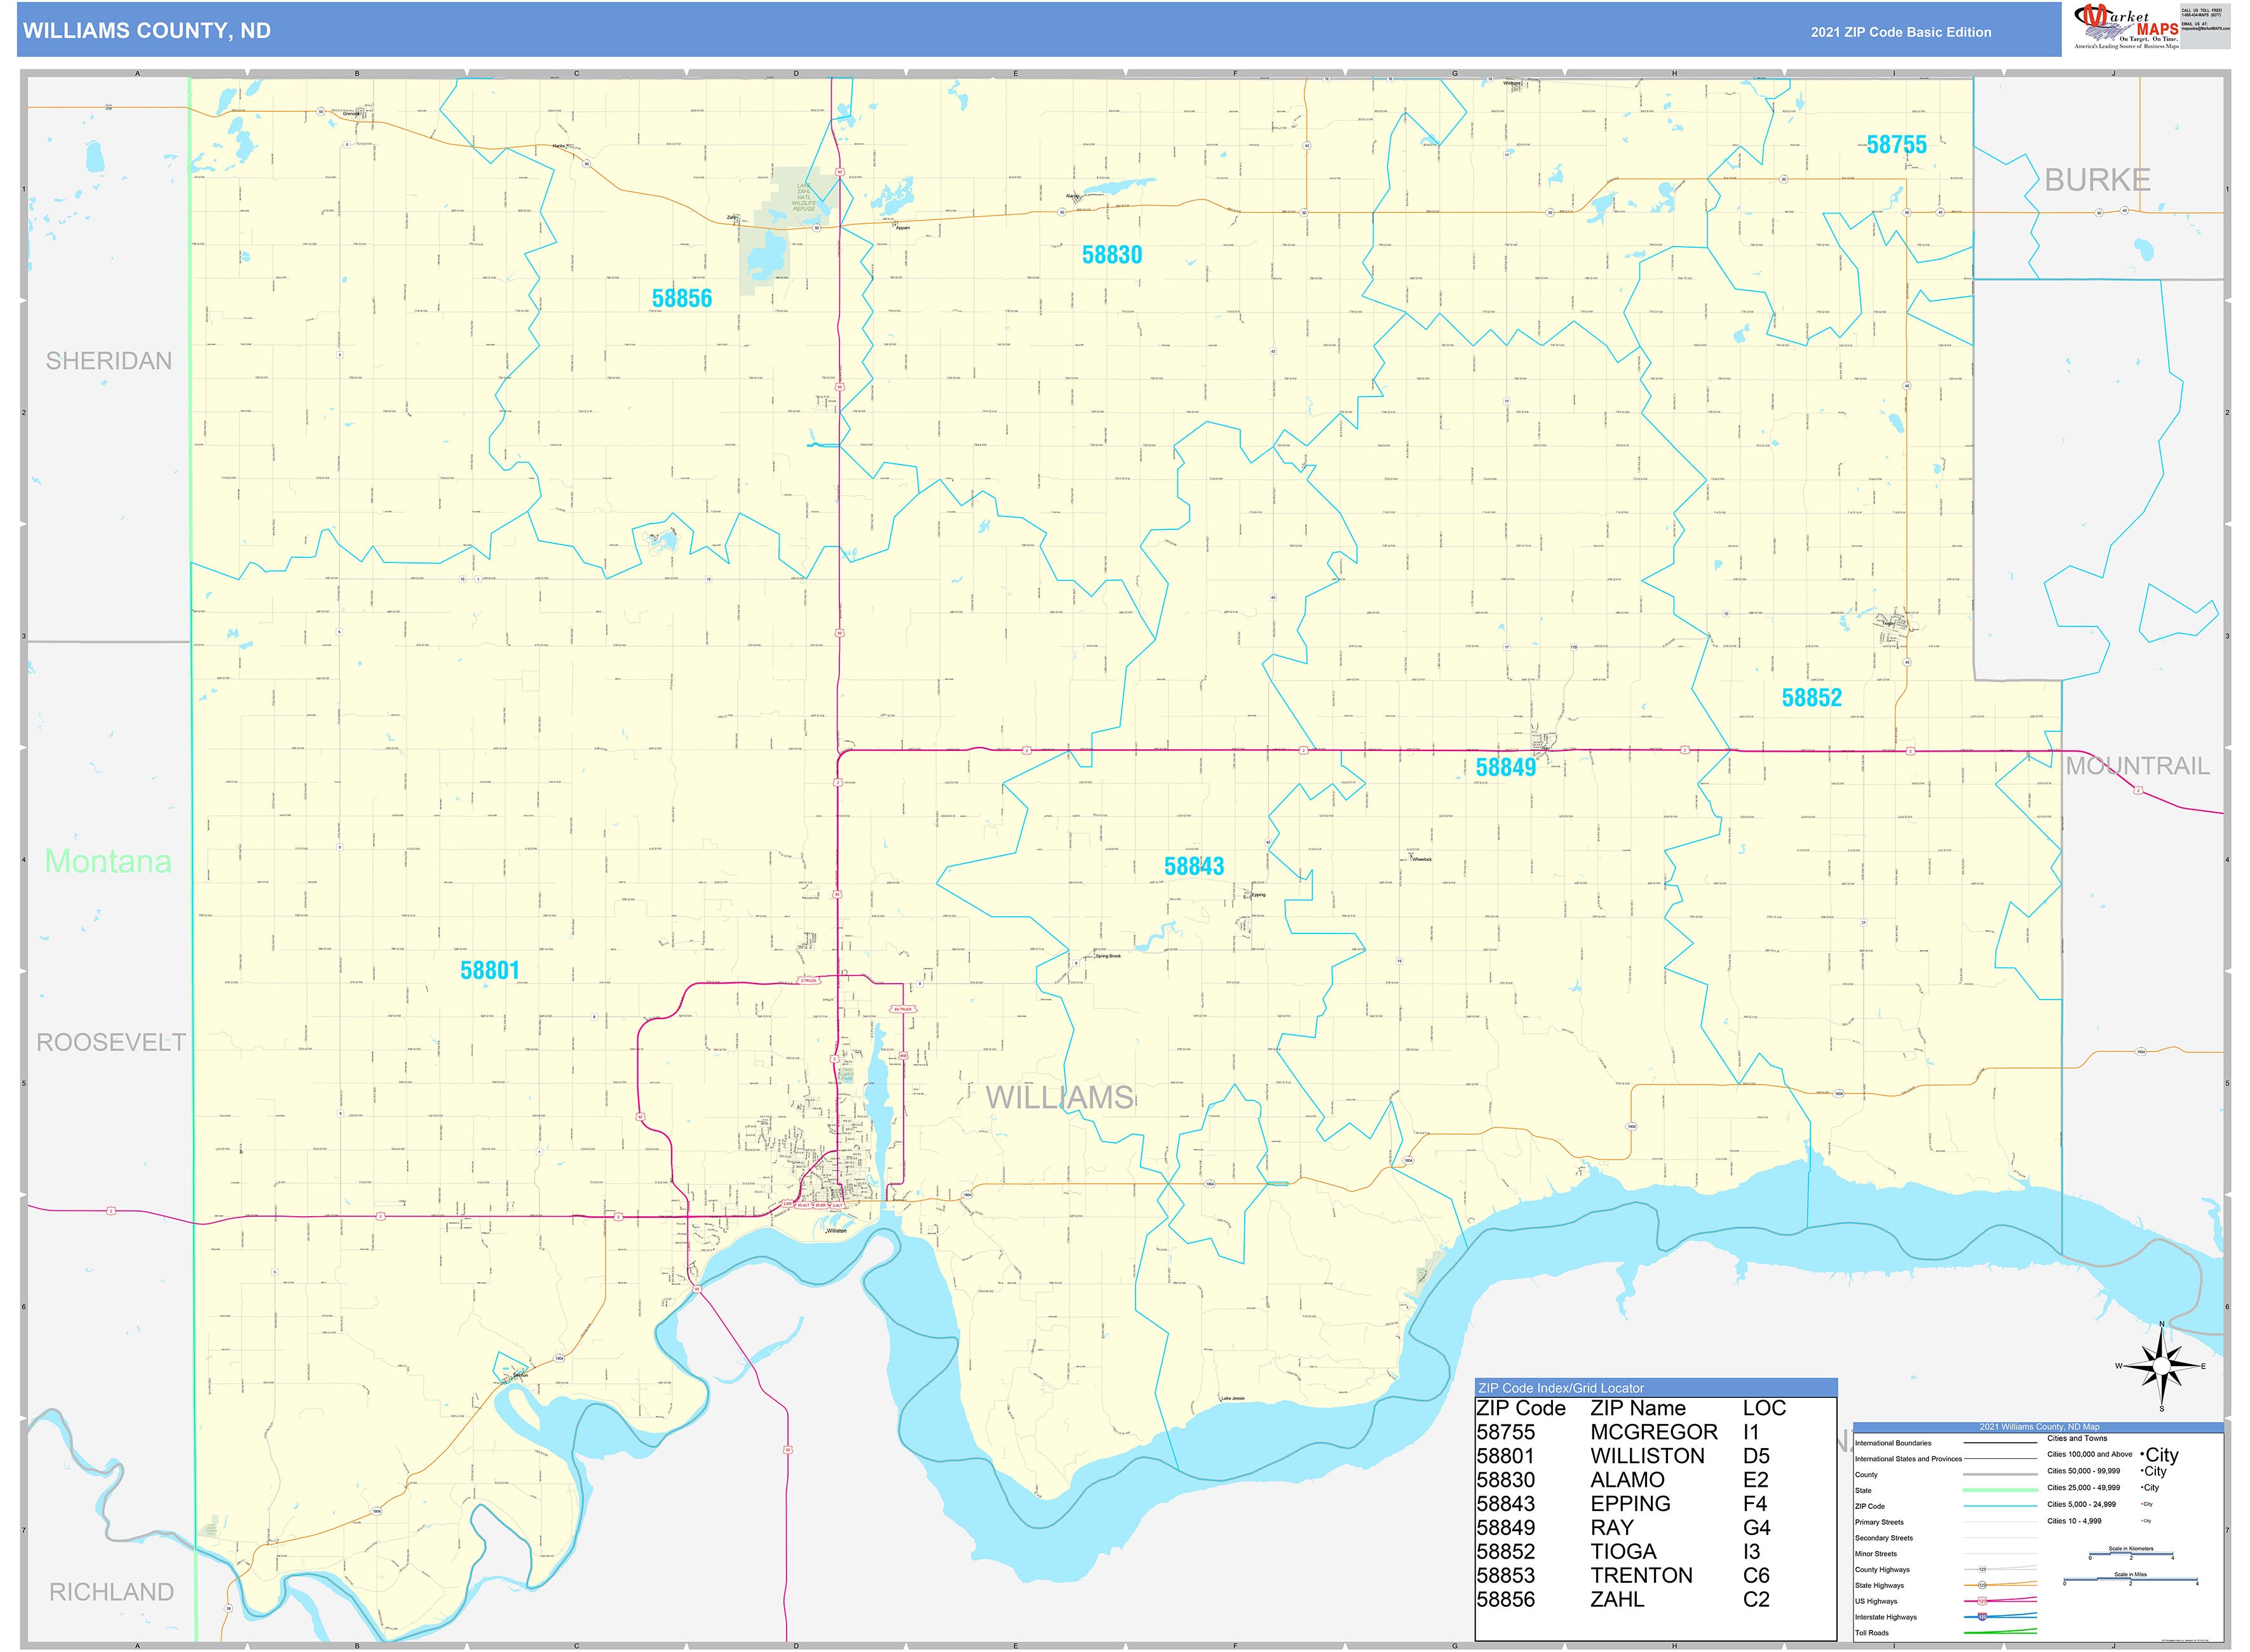 Williams County, ND Zip Code Wall Map Basic Style by MarketMAPS